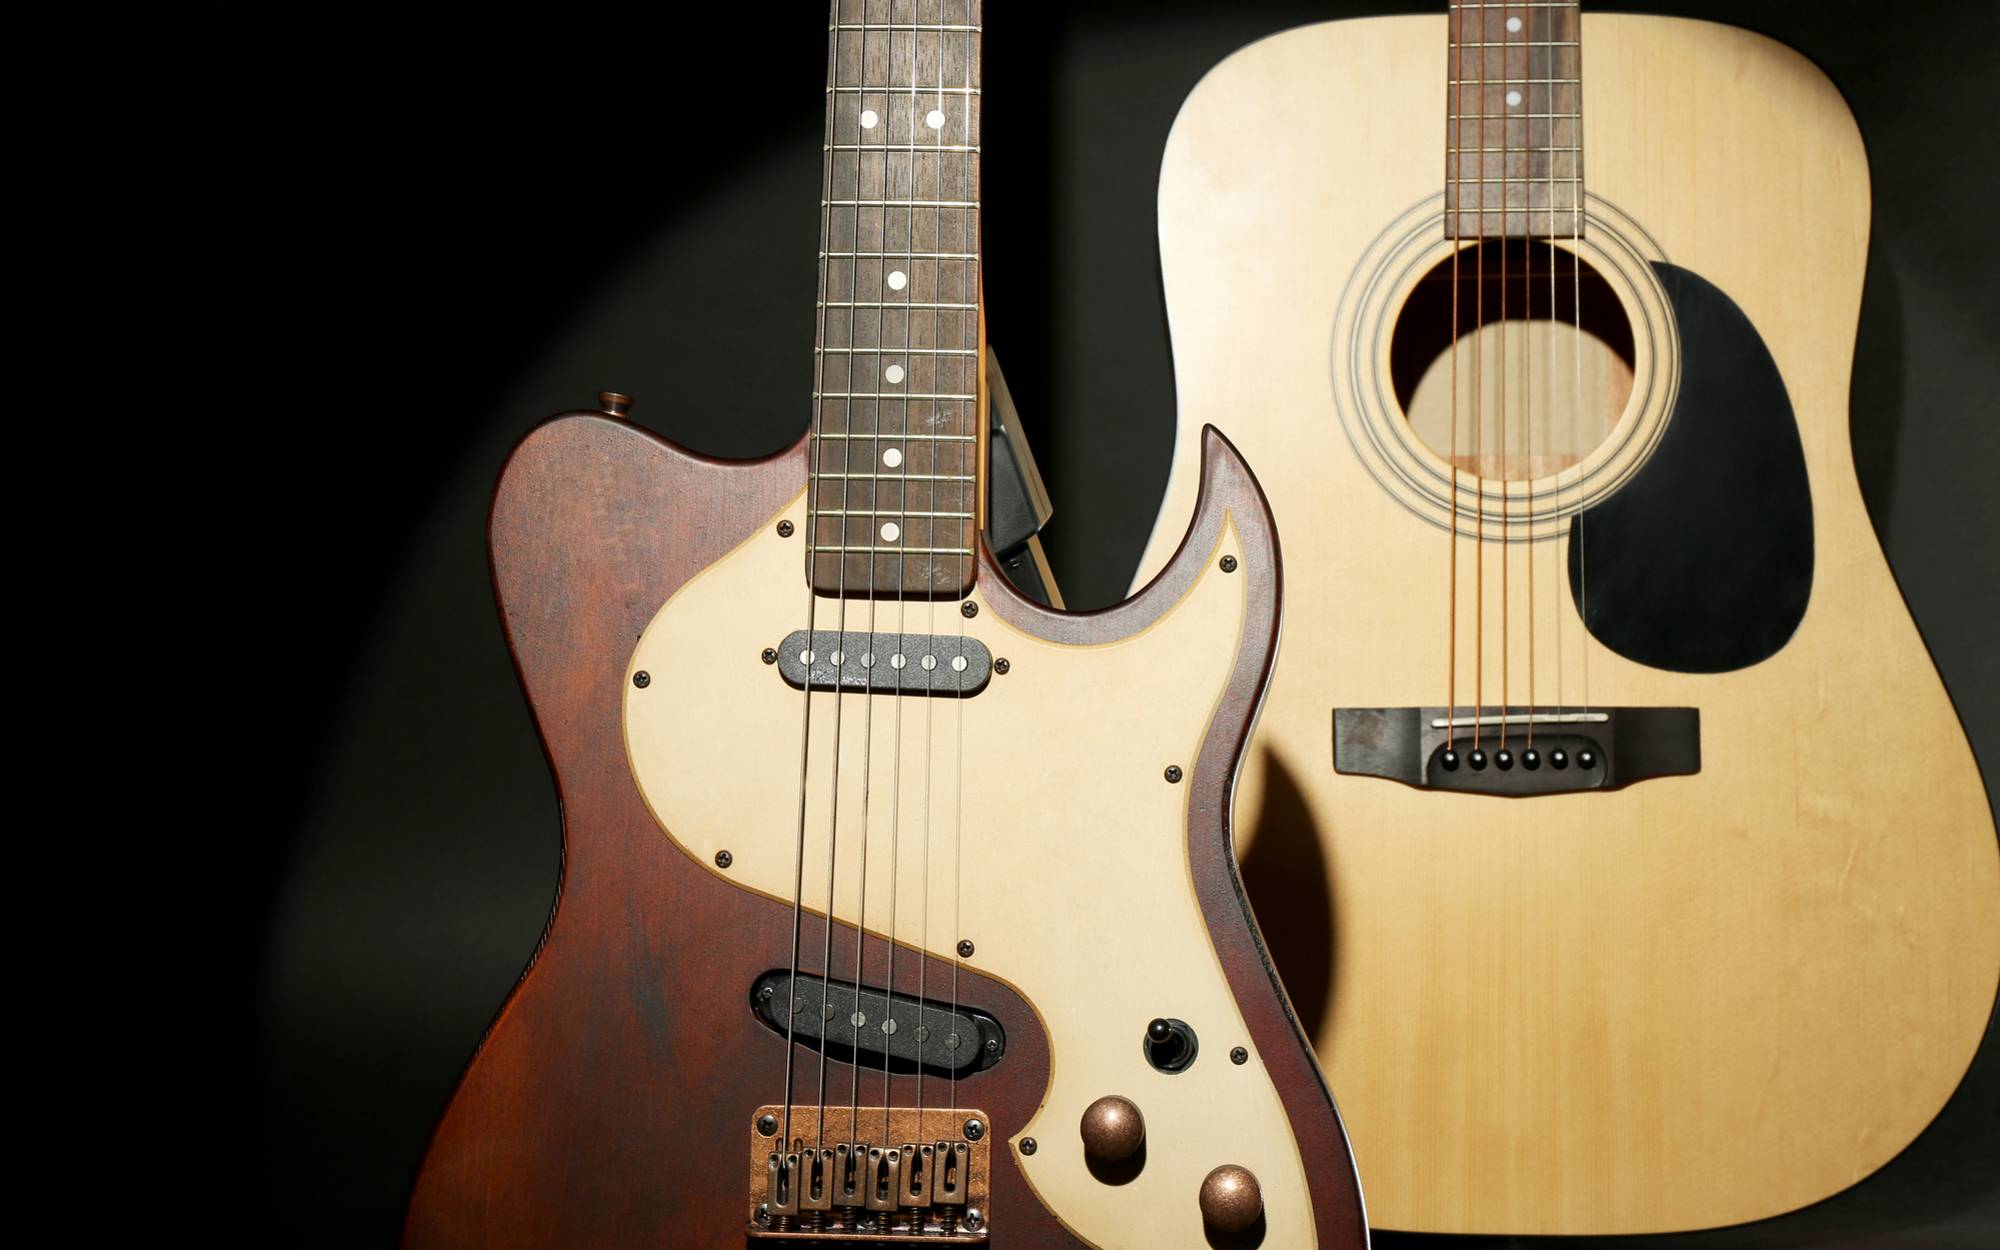 Electric Guitar Or Acoustic Guitar: Which Is Easier To Play